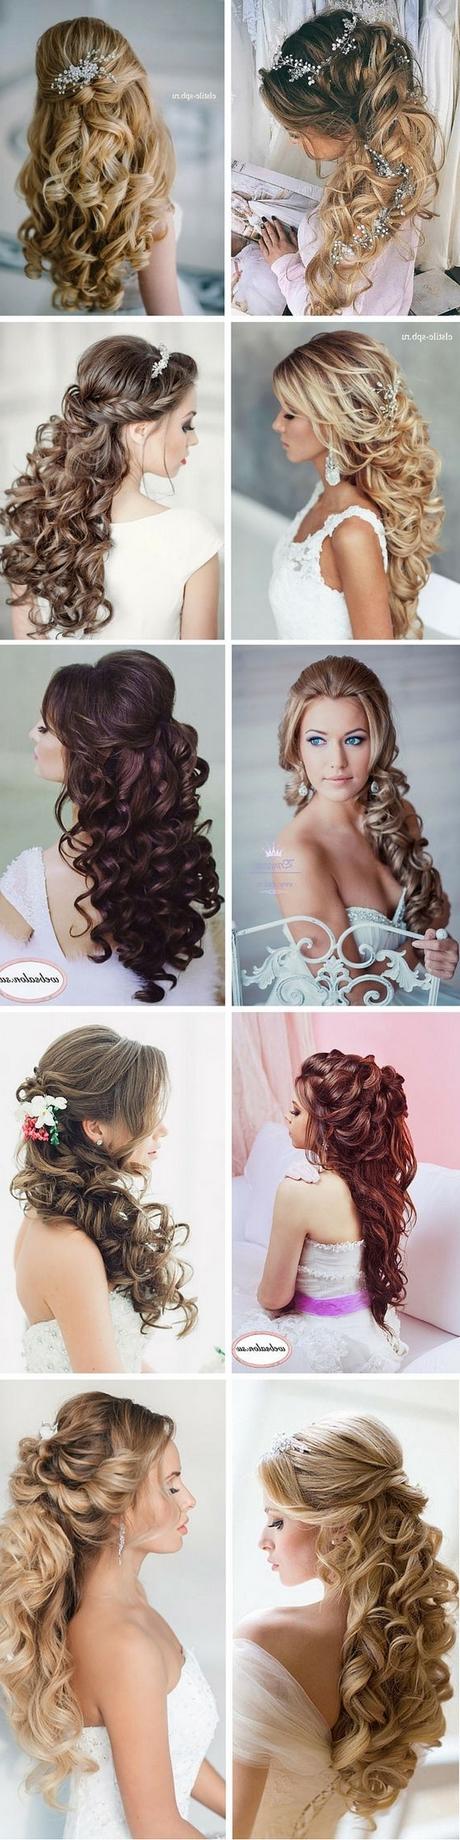 Wedding hairstyles for long curly hair half up half down wedding-hairstyles-for-long-curly-hair-half-up-half-down-12_15